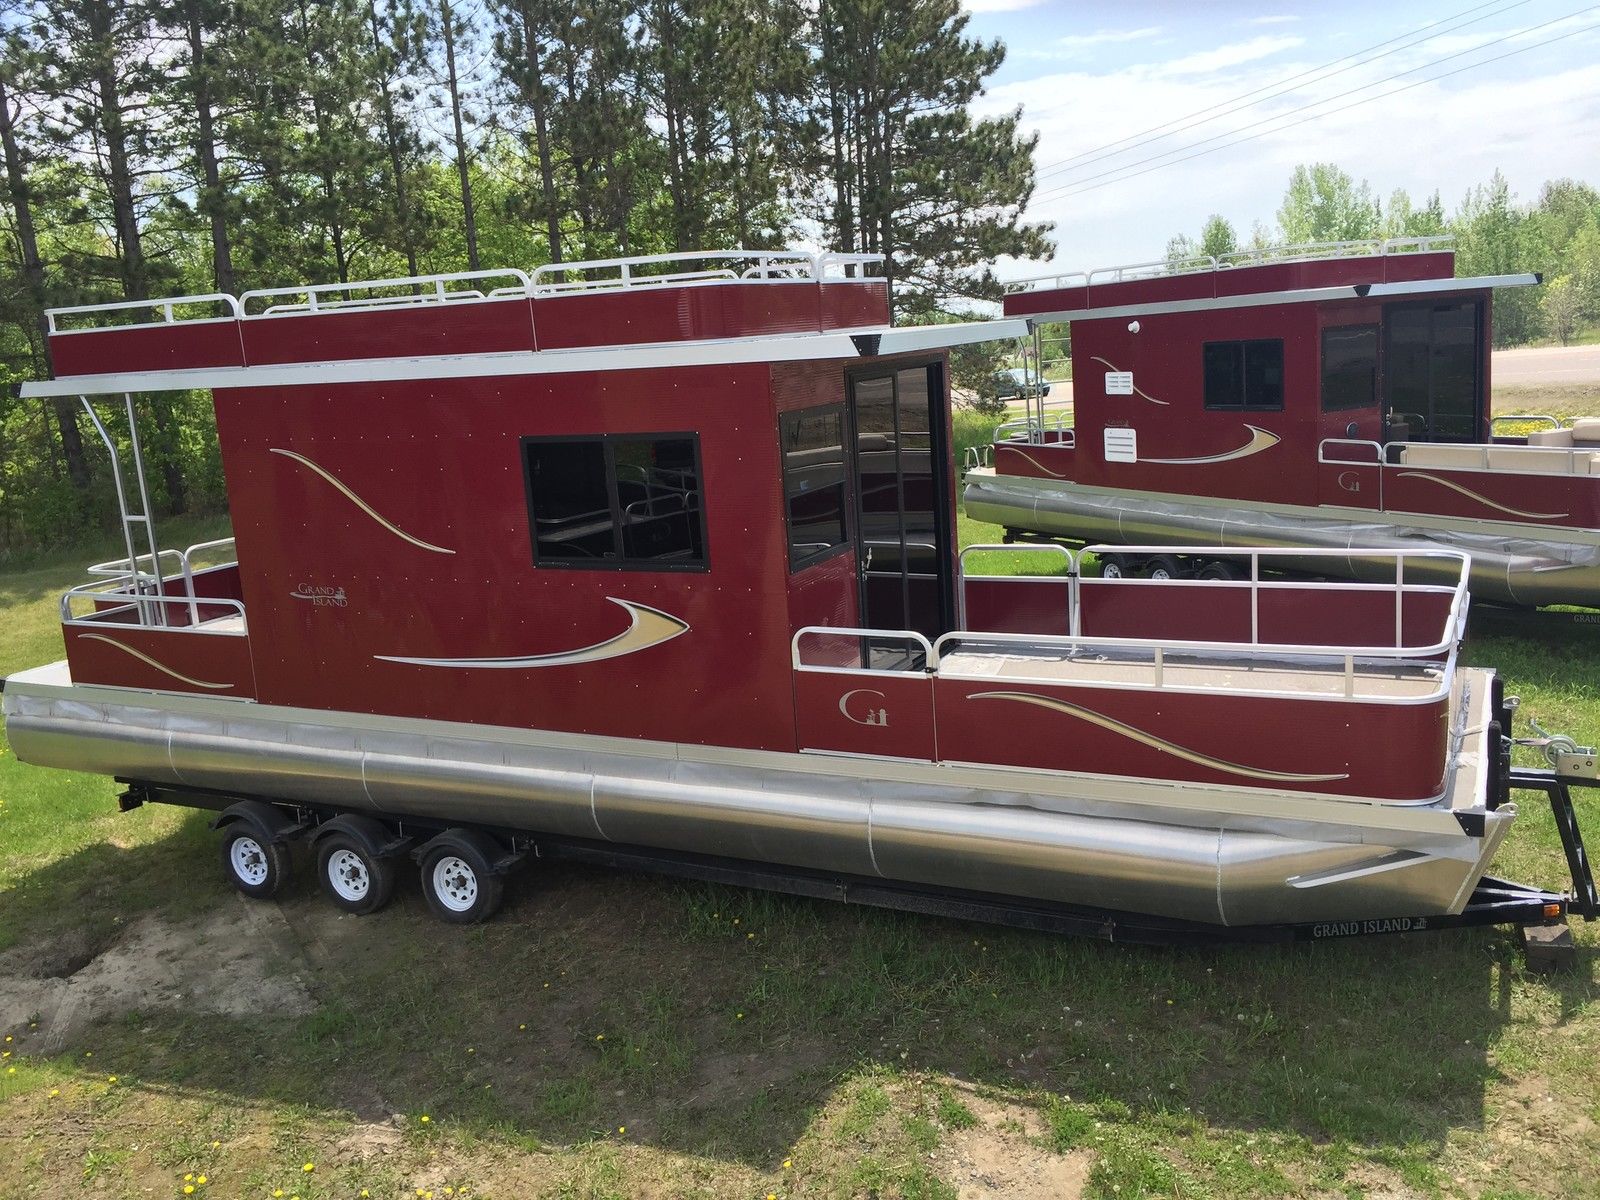 Grand Island 32 2014 for sale for $19,999 - Boats-from-USA.com